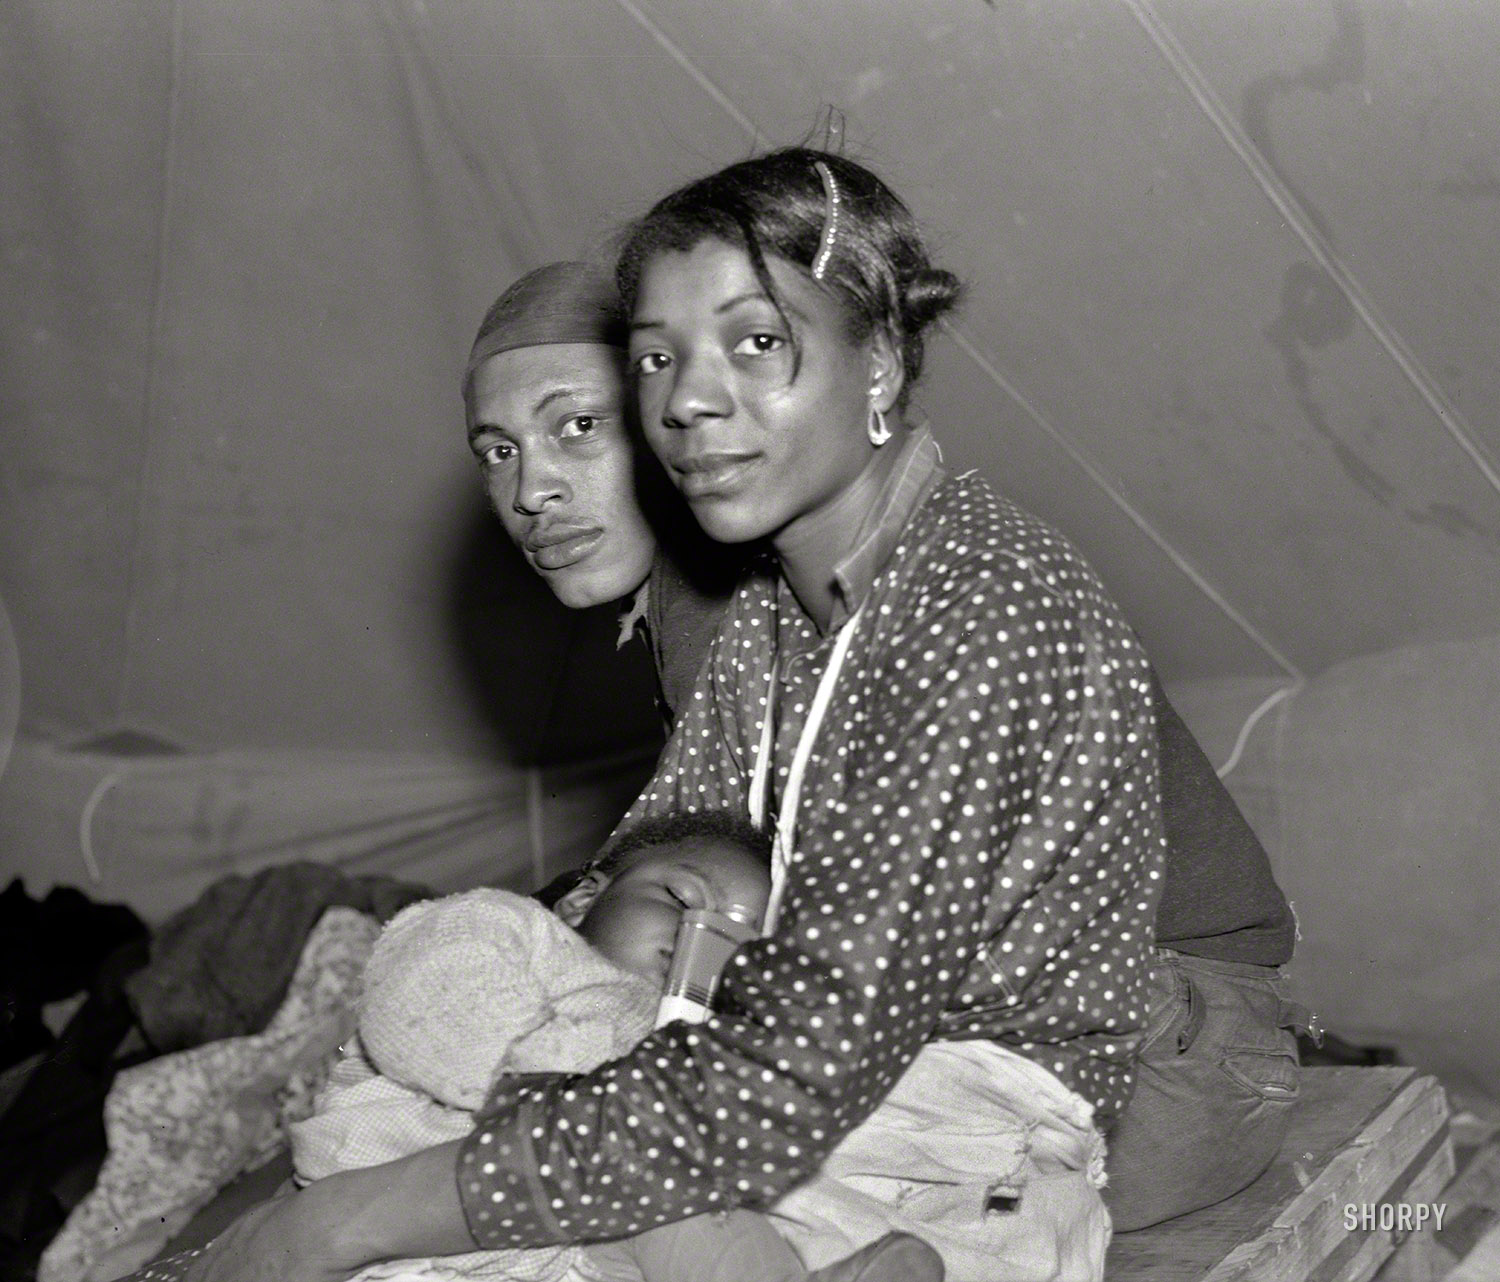 Feb. 1937. "Refugees from the 1937 flood in their tent of the camp in Marianna, Arkansas." Photo by Edwin Locke, Resettlement Administration. View full size.